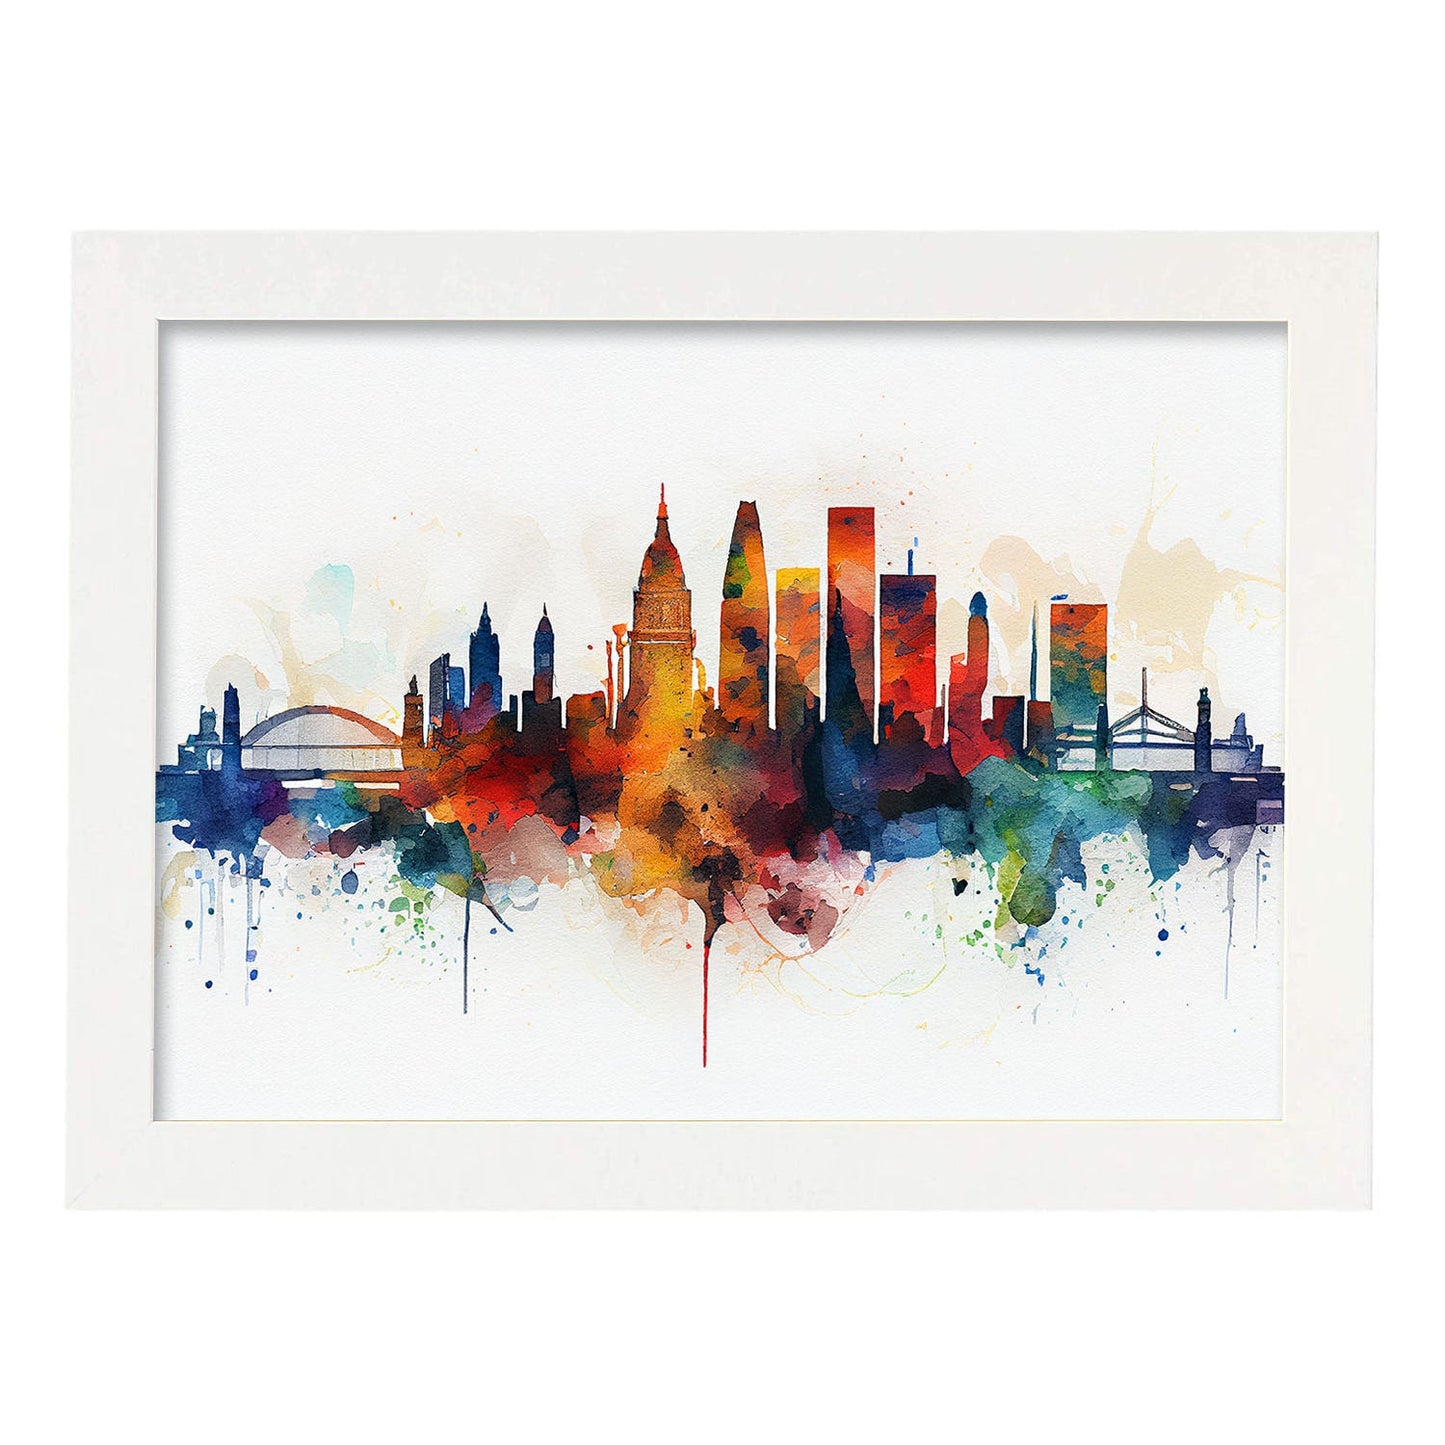 Nacnic watercolor of a skyline of the city of London_1. Aesthetic Wall Art Prints for Bedroom or Living Room Design.-Artwork-Nacnic-A4-Marco Blanco-Nacnic Estudio SL